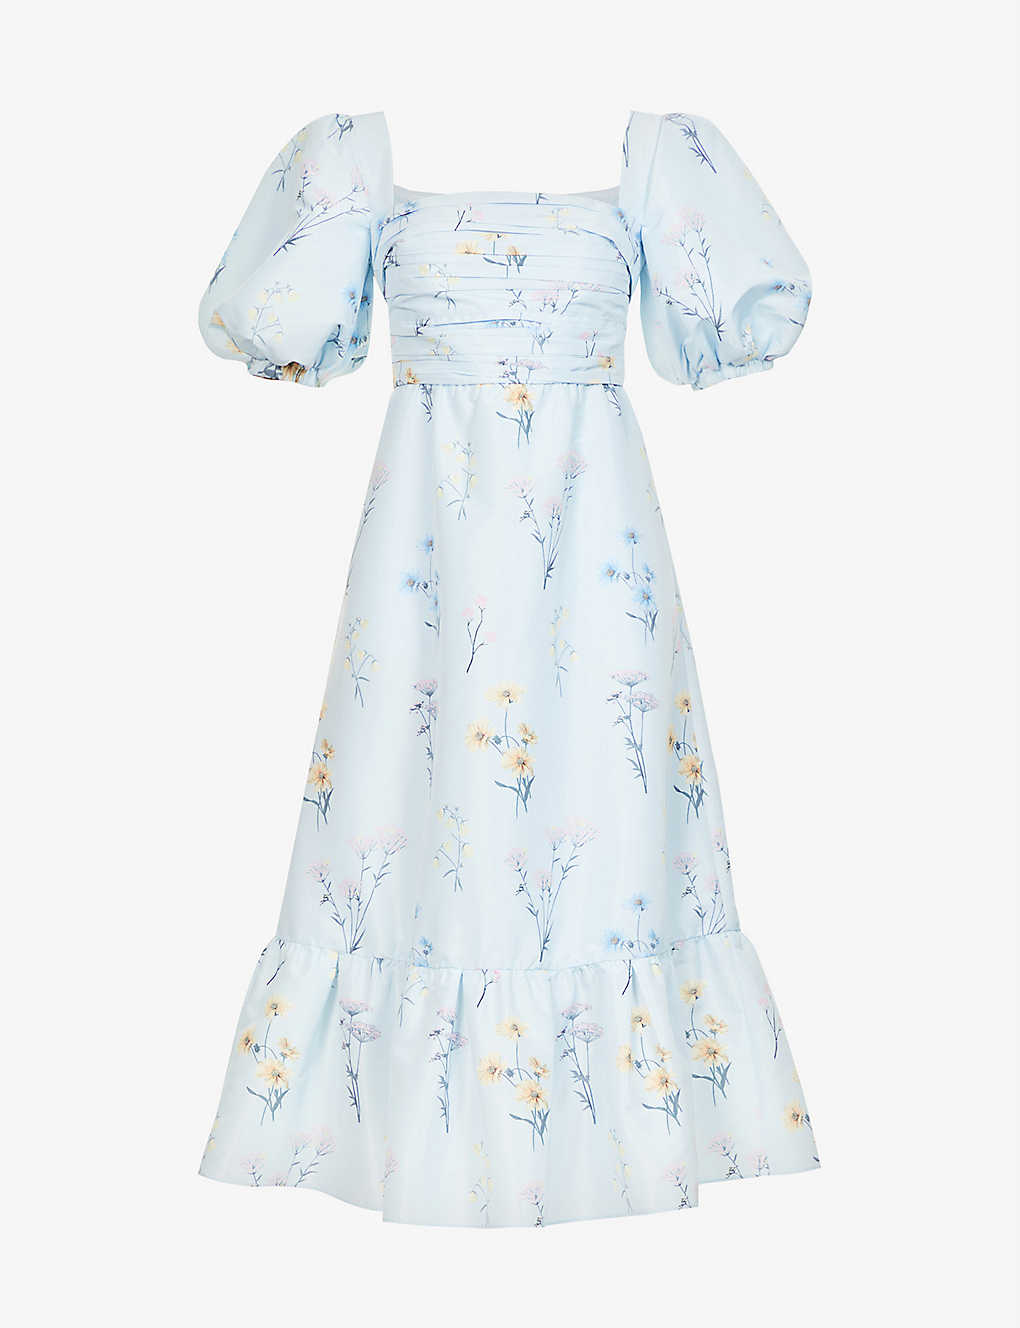 The Best Wedding Guest Dresses For Spring - The Wedding Edition